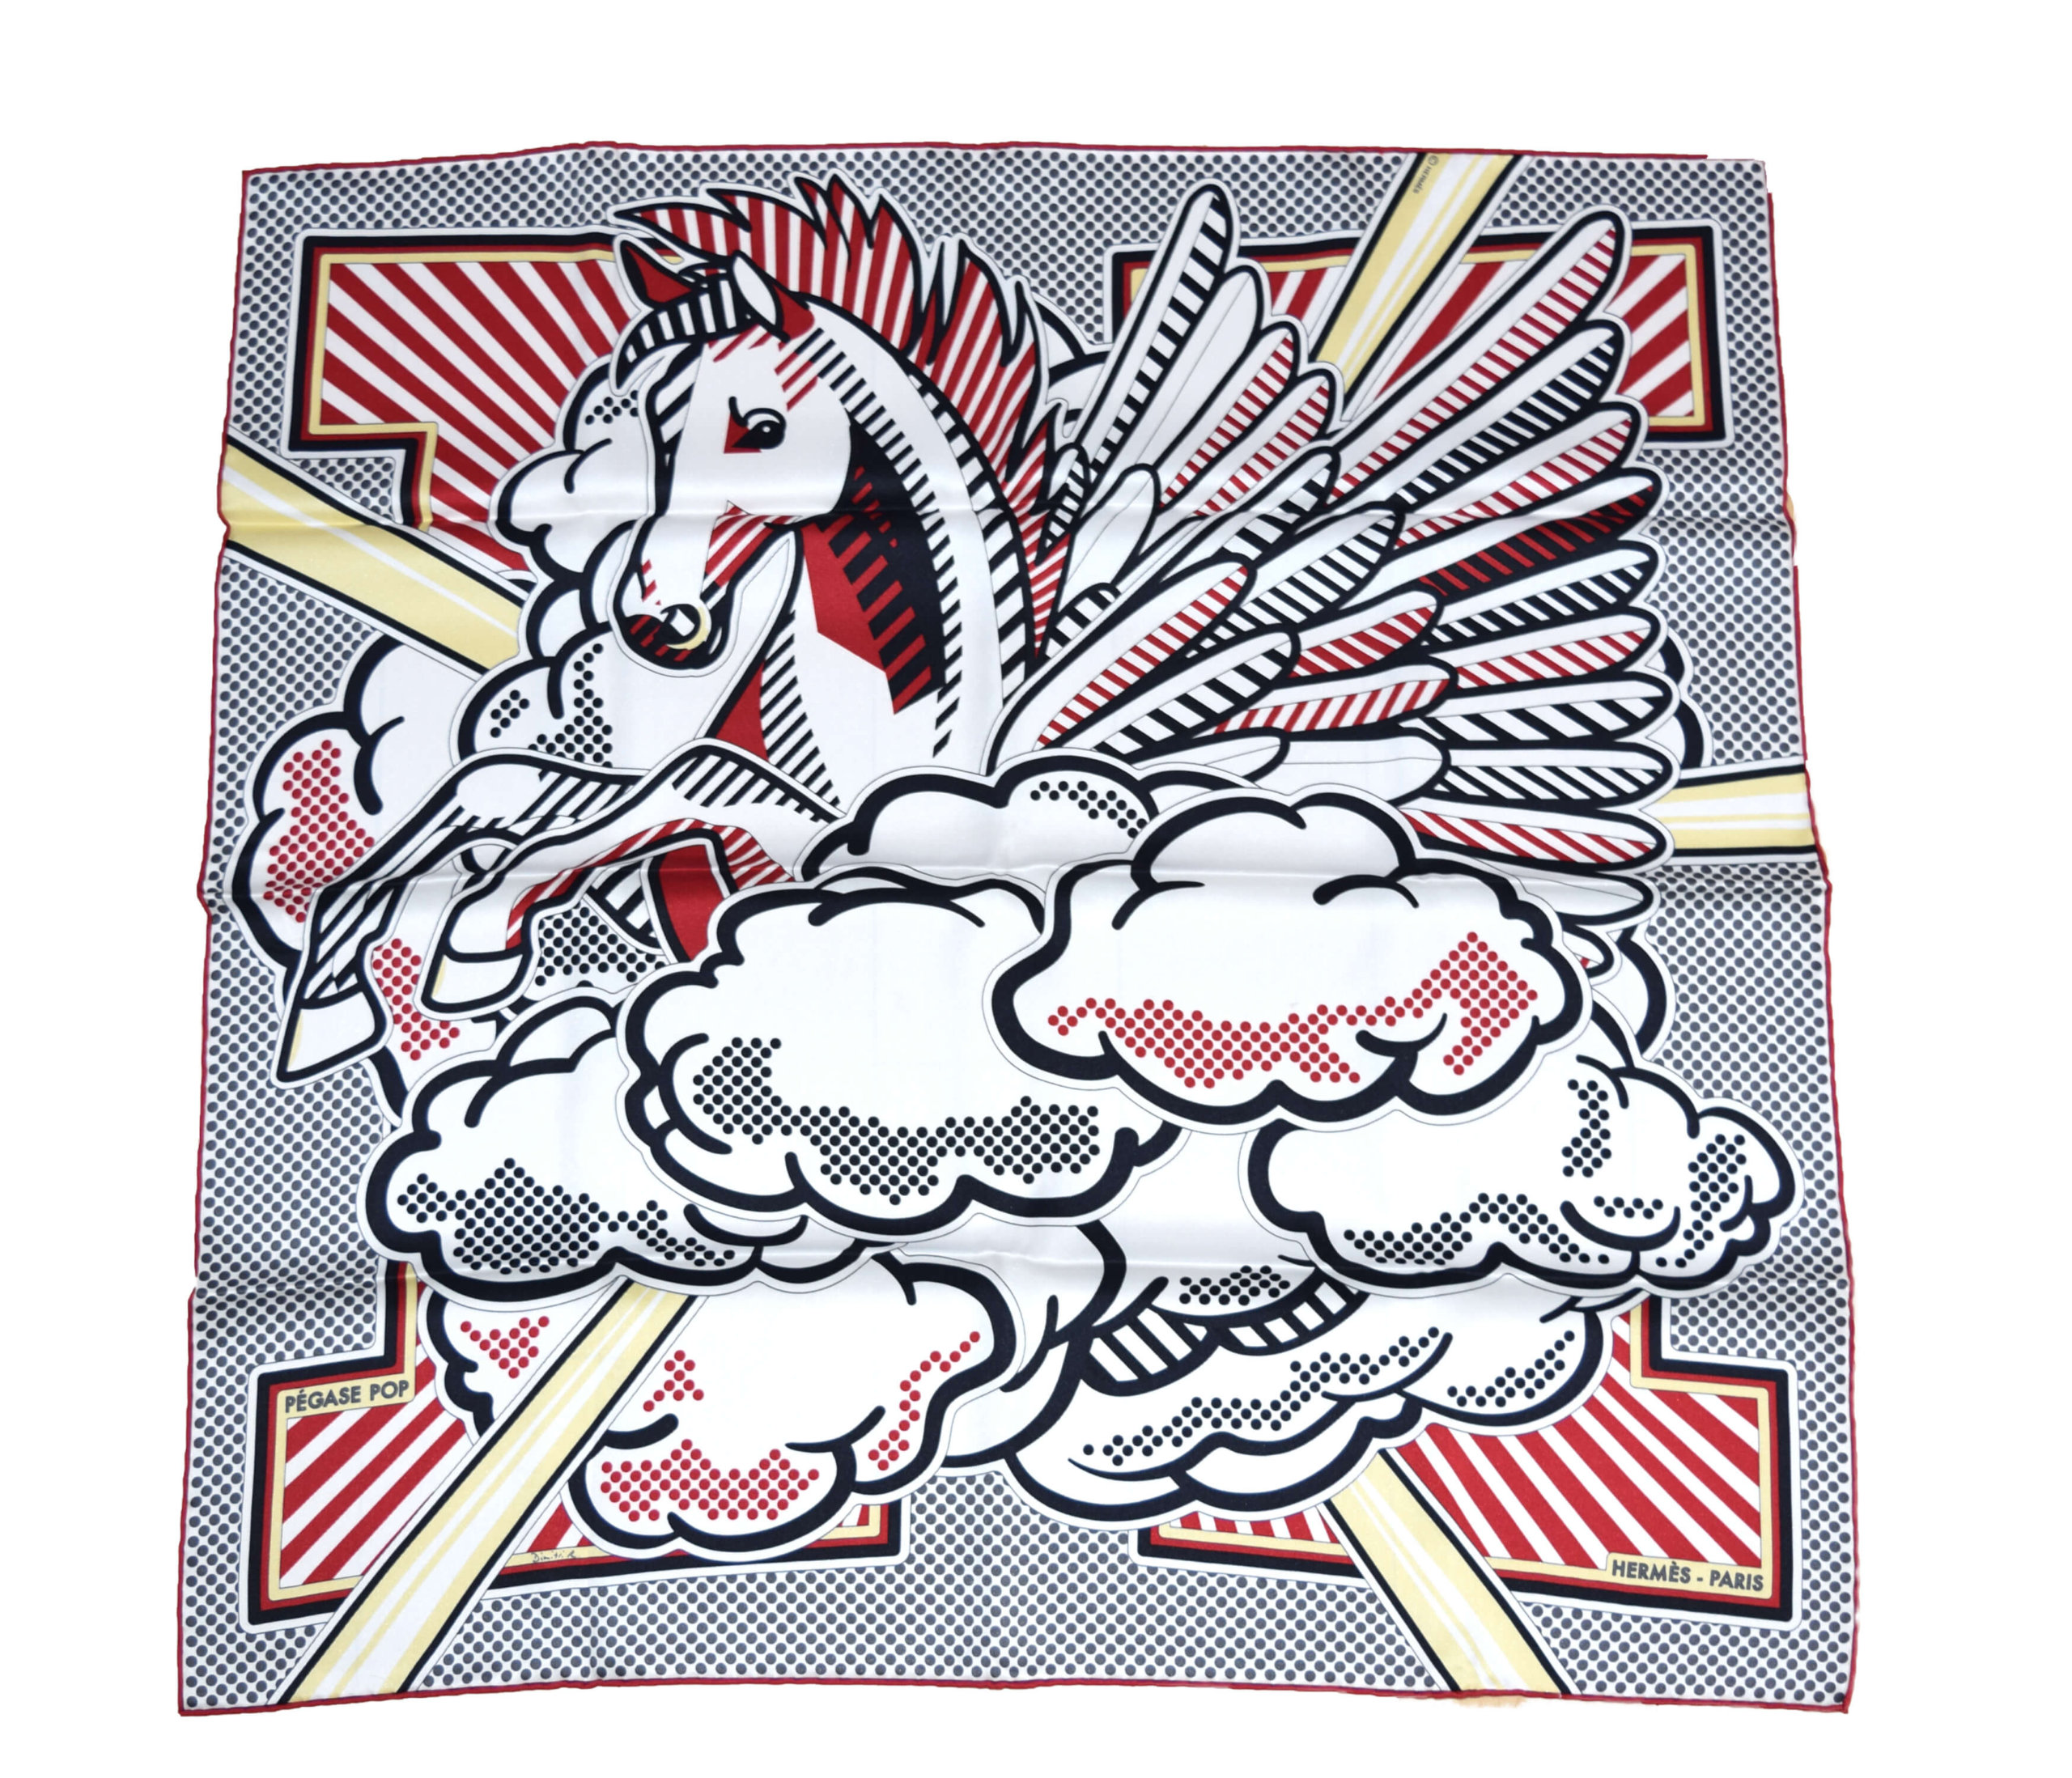 Pony Up with This 'Pegase Pop' Scarf from Hermes